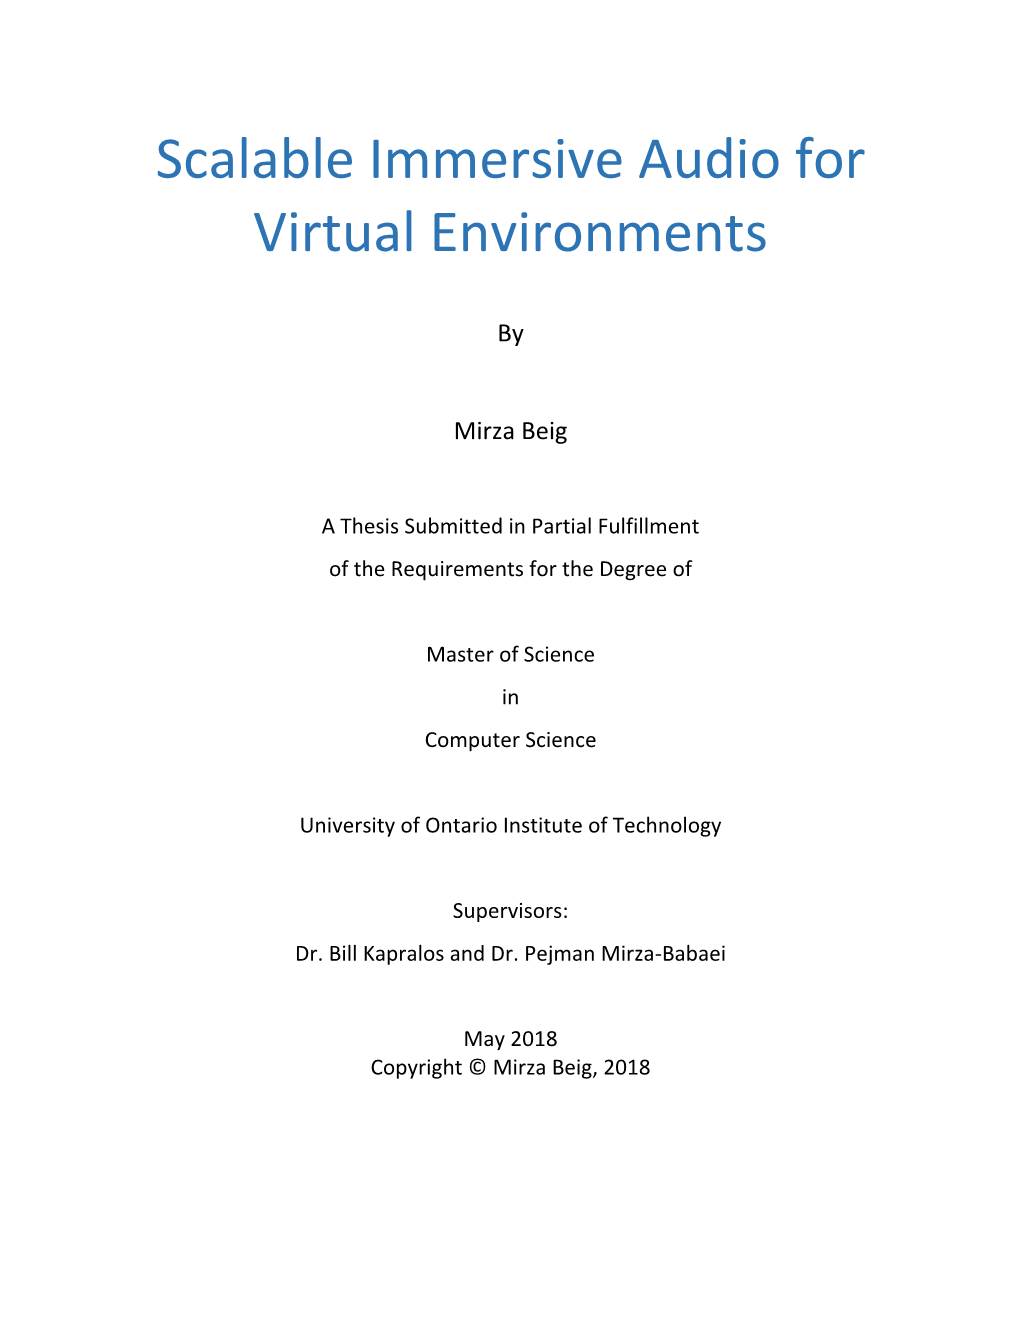 Scalable Immersive Audio for Virtual Environments